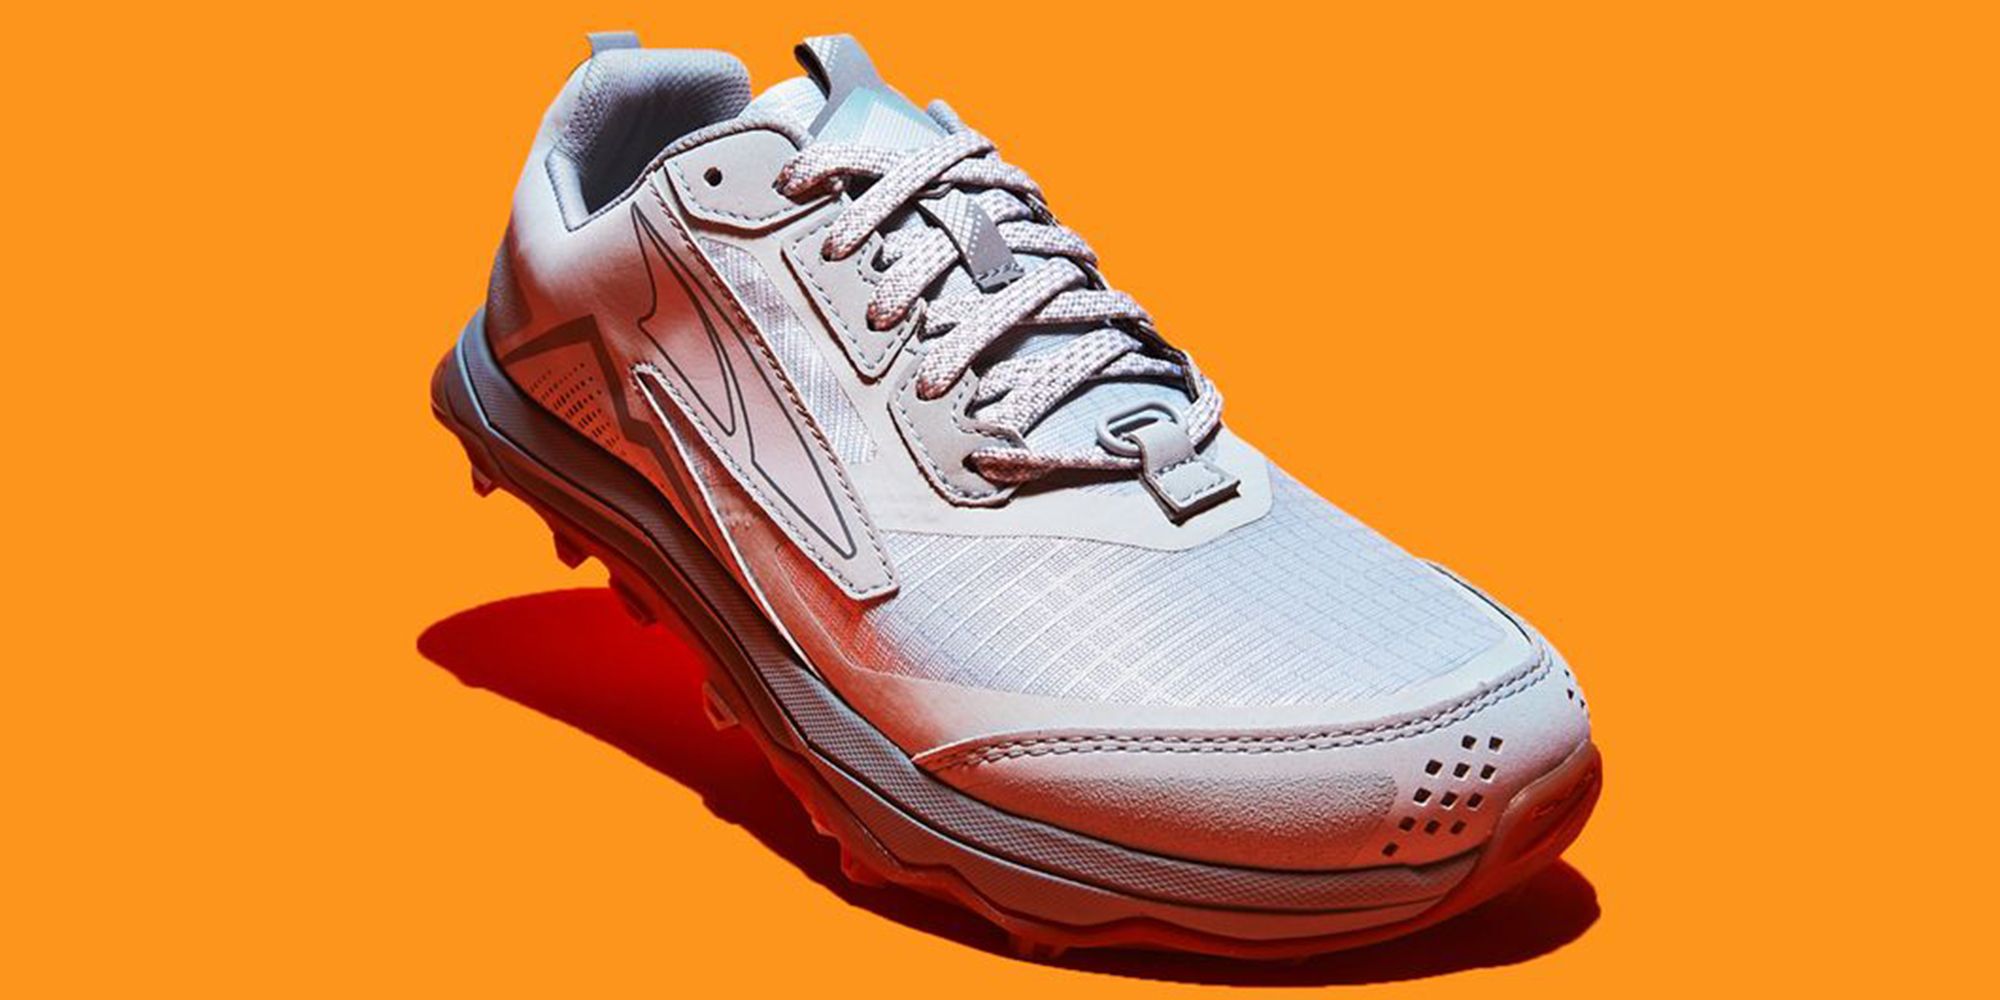 How to Waterproof Your Running Shoes